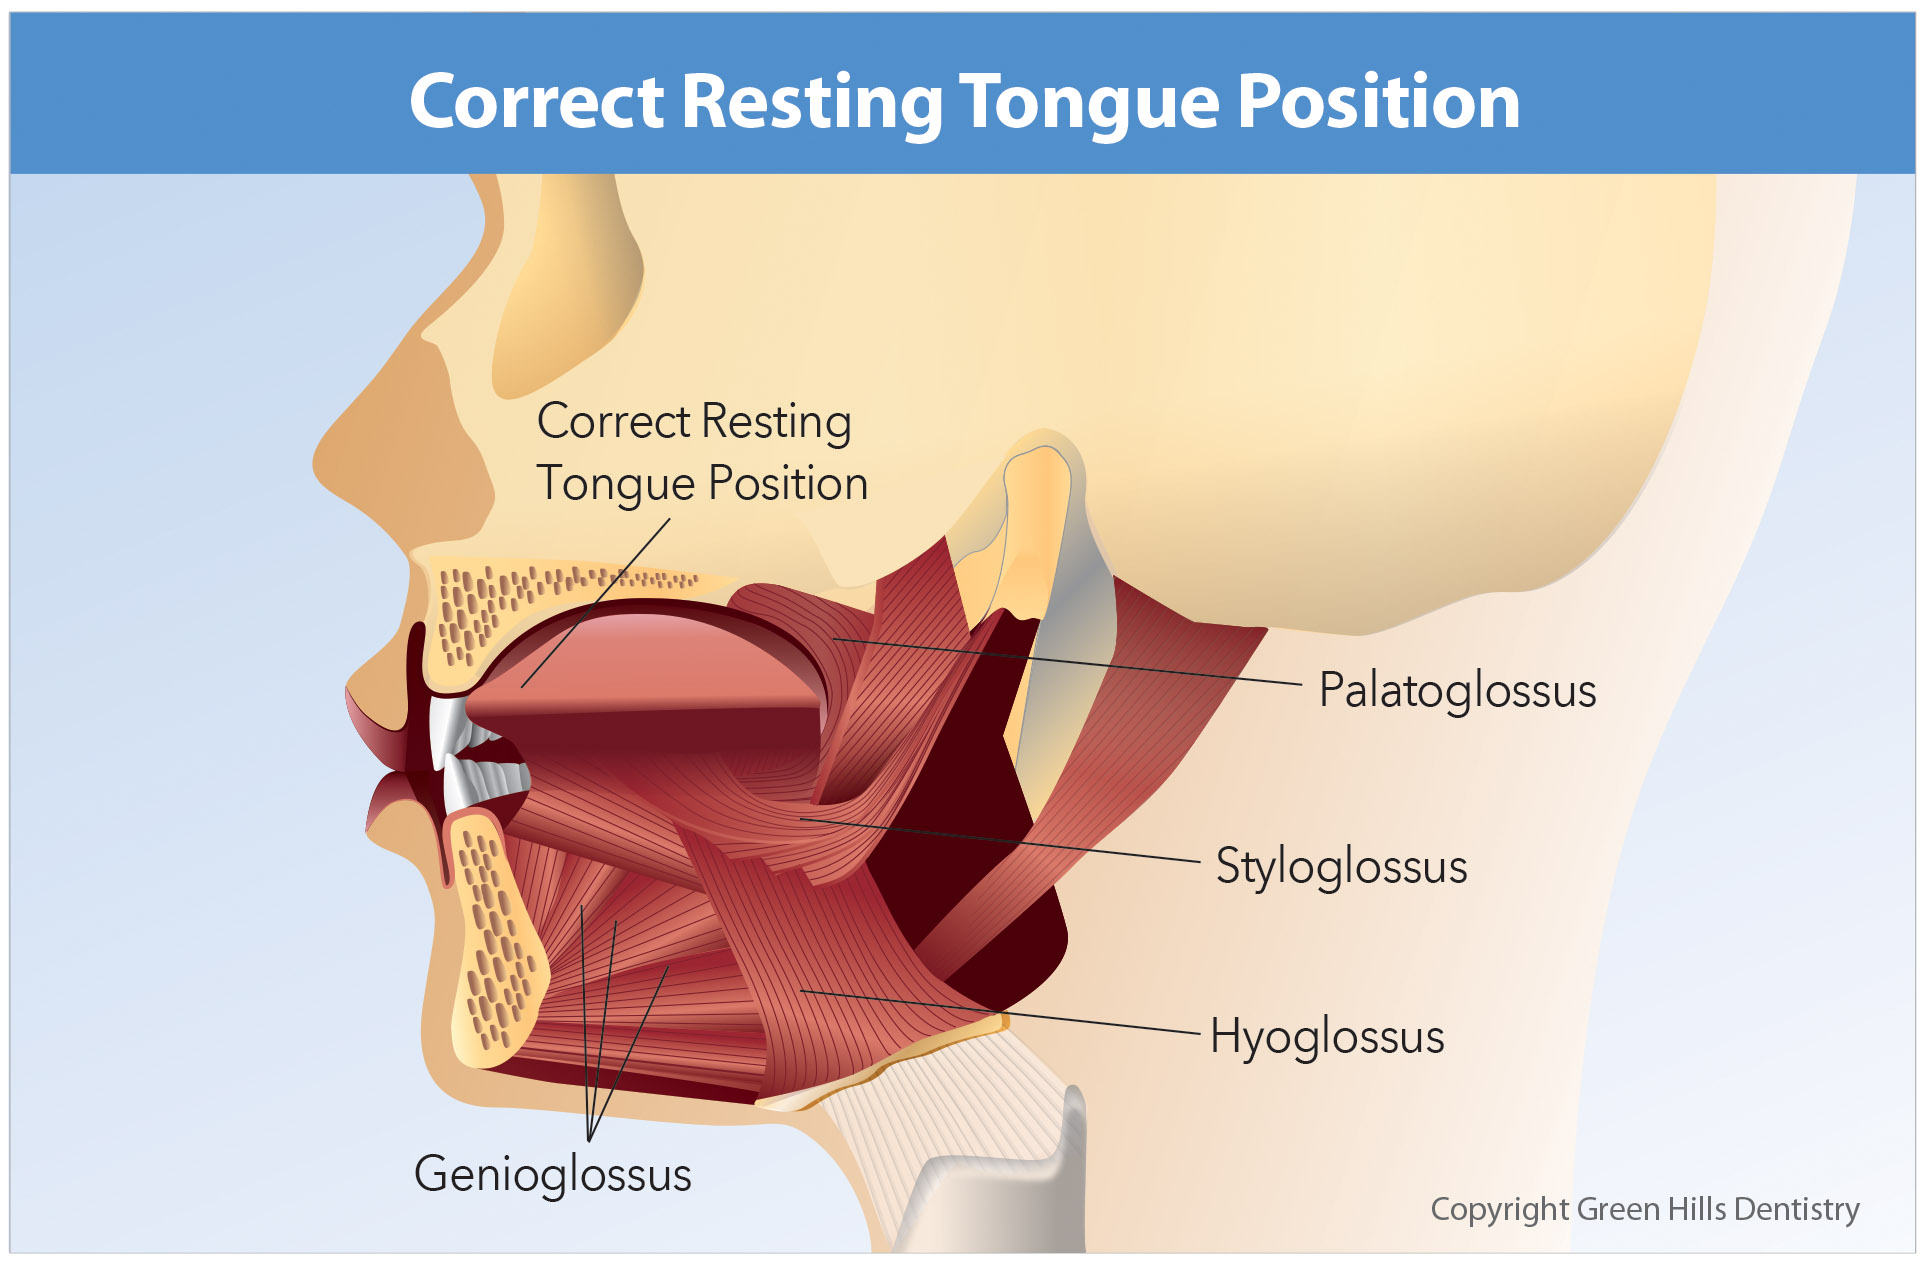 Correct resting tongue position